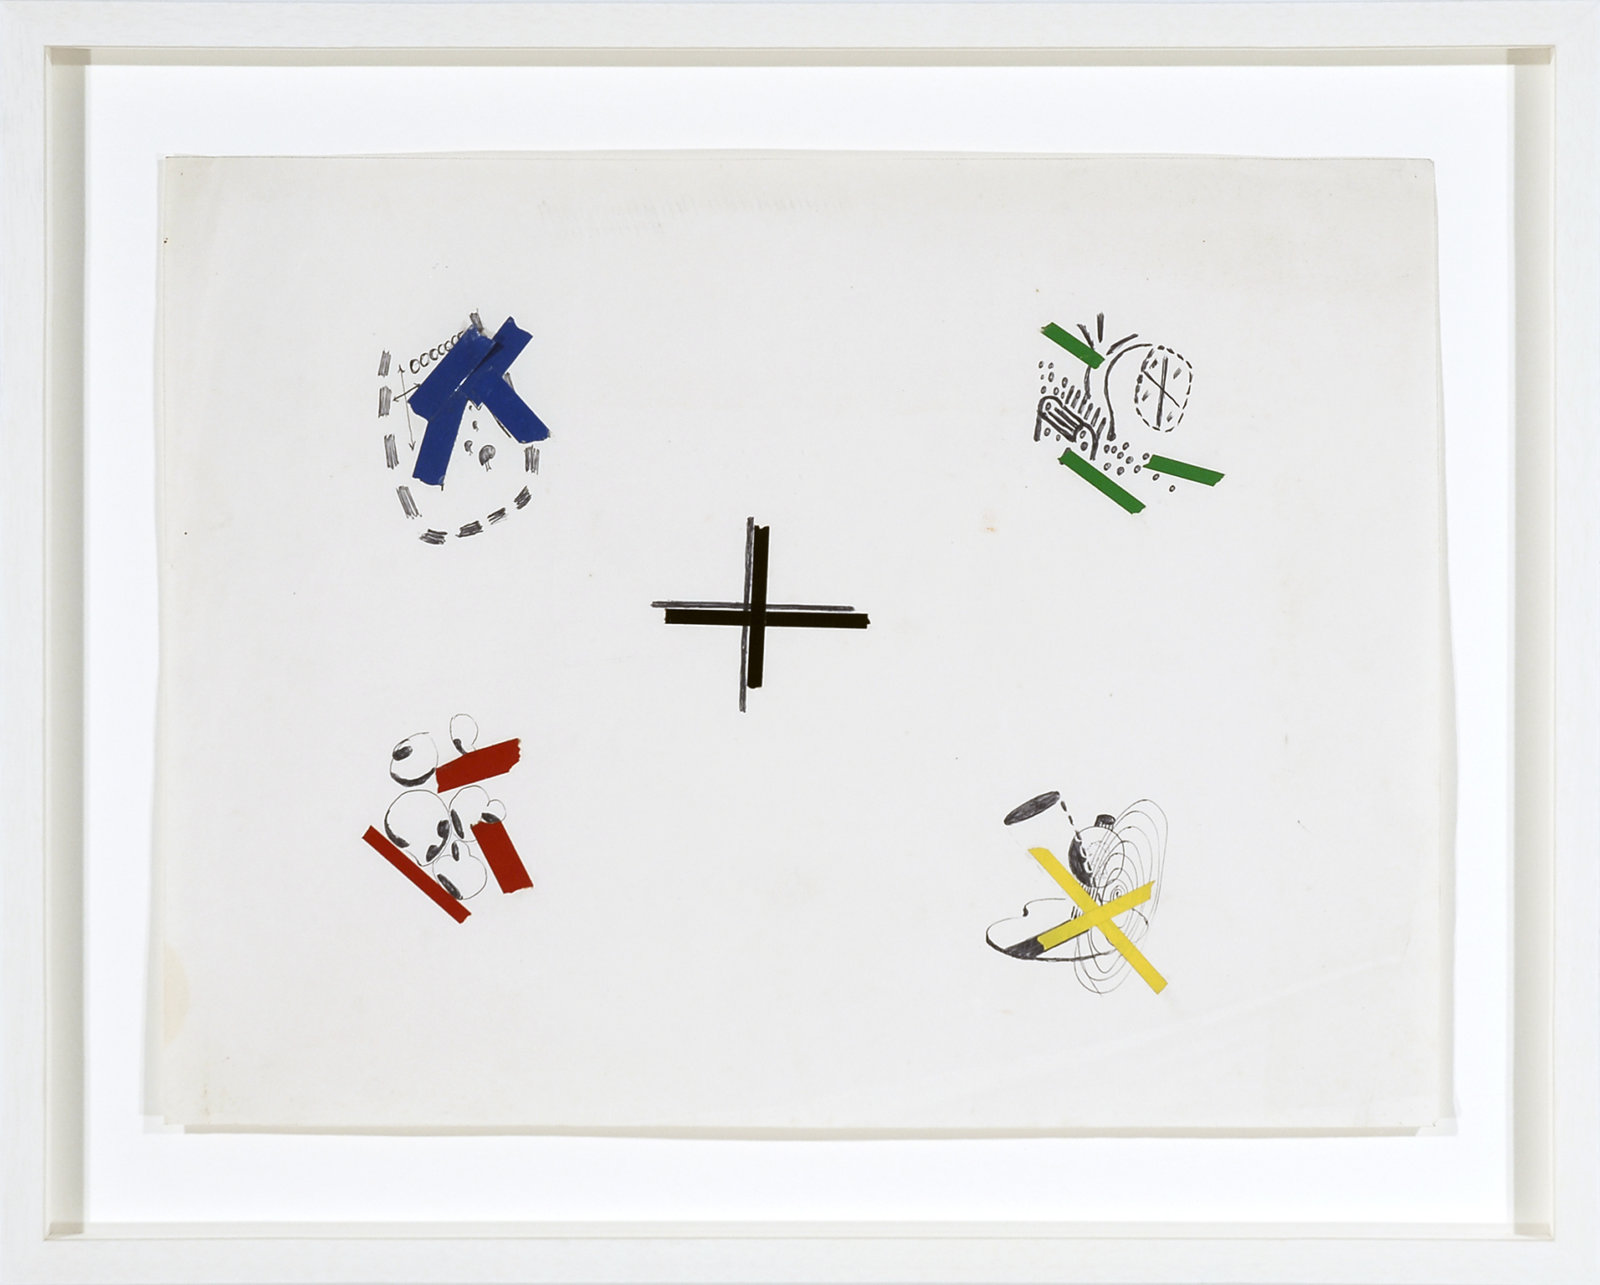 Jerry Pethick, Quadrant Reverse, 1972, paper, tape, ink, 21 x 27 in. (53 x 67 cm)